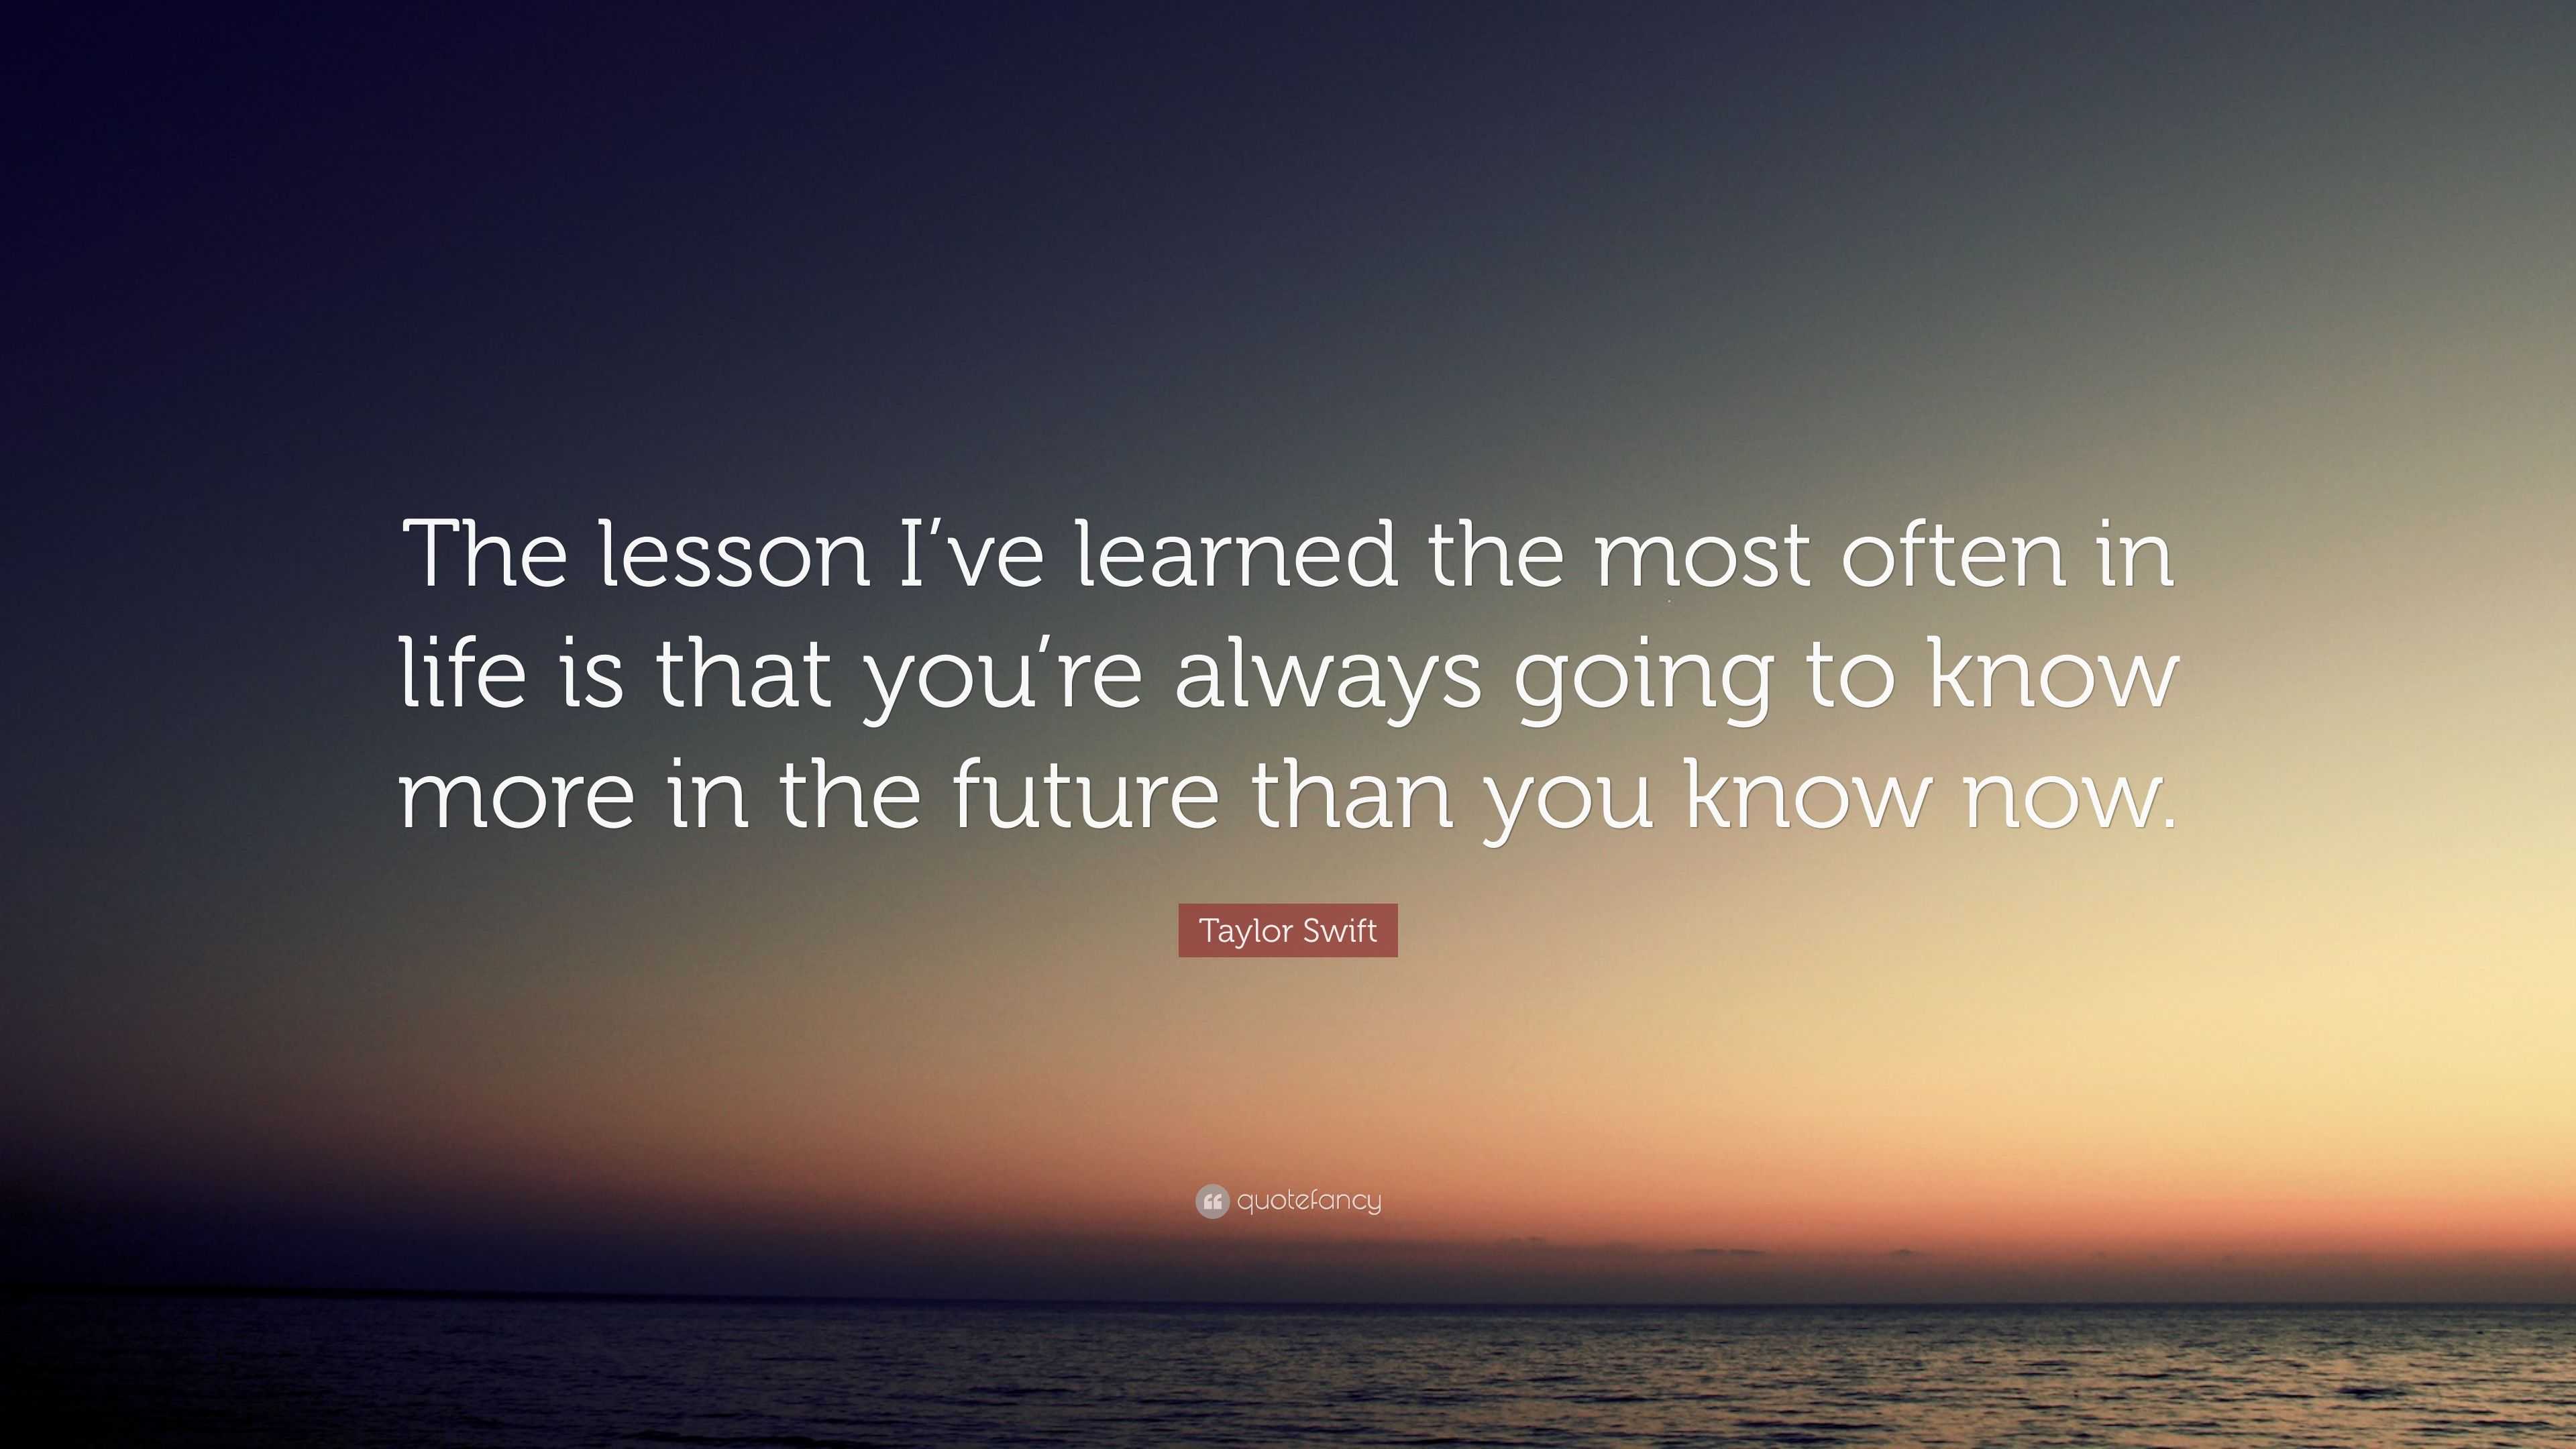 Taylor Swift quote: In life, you learn lessons. And sometimes you